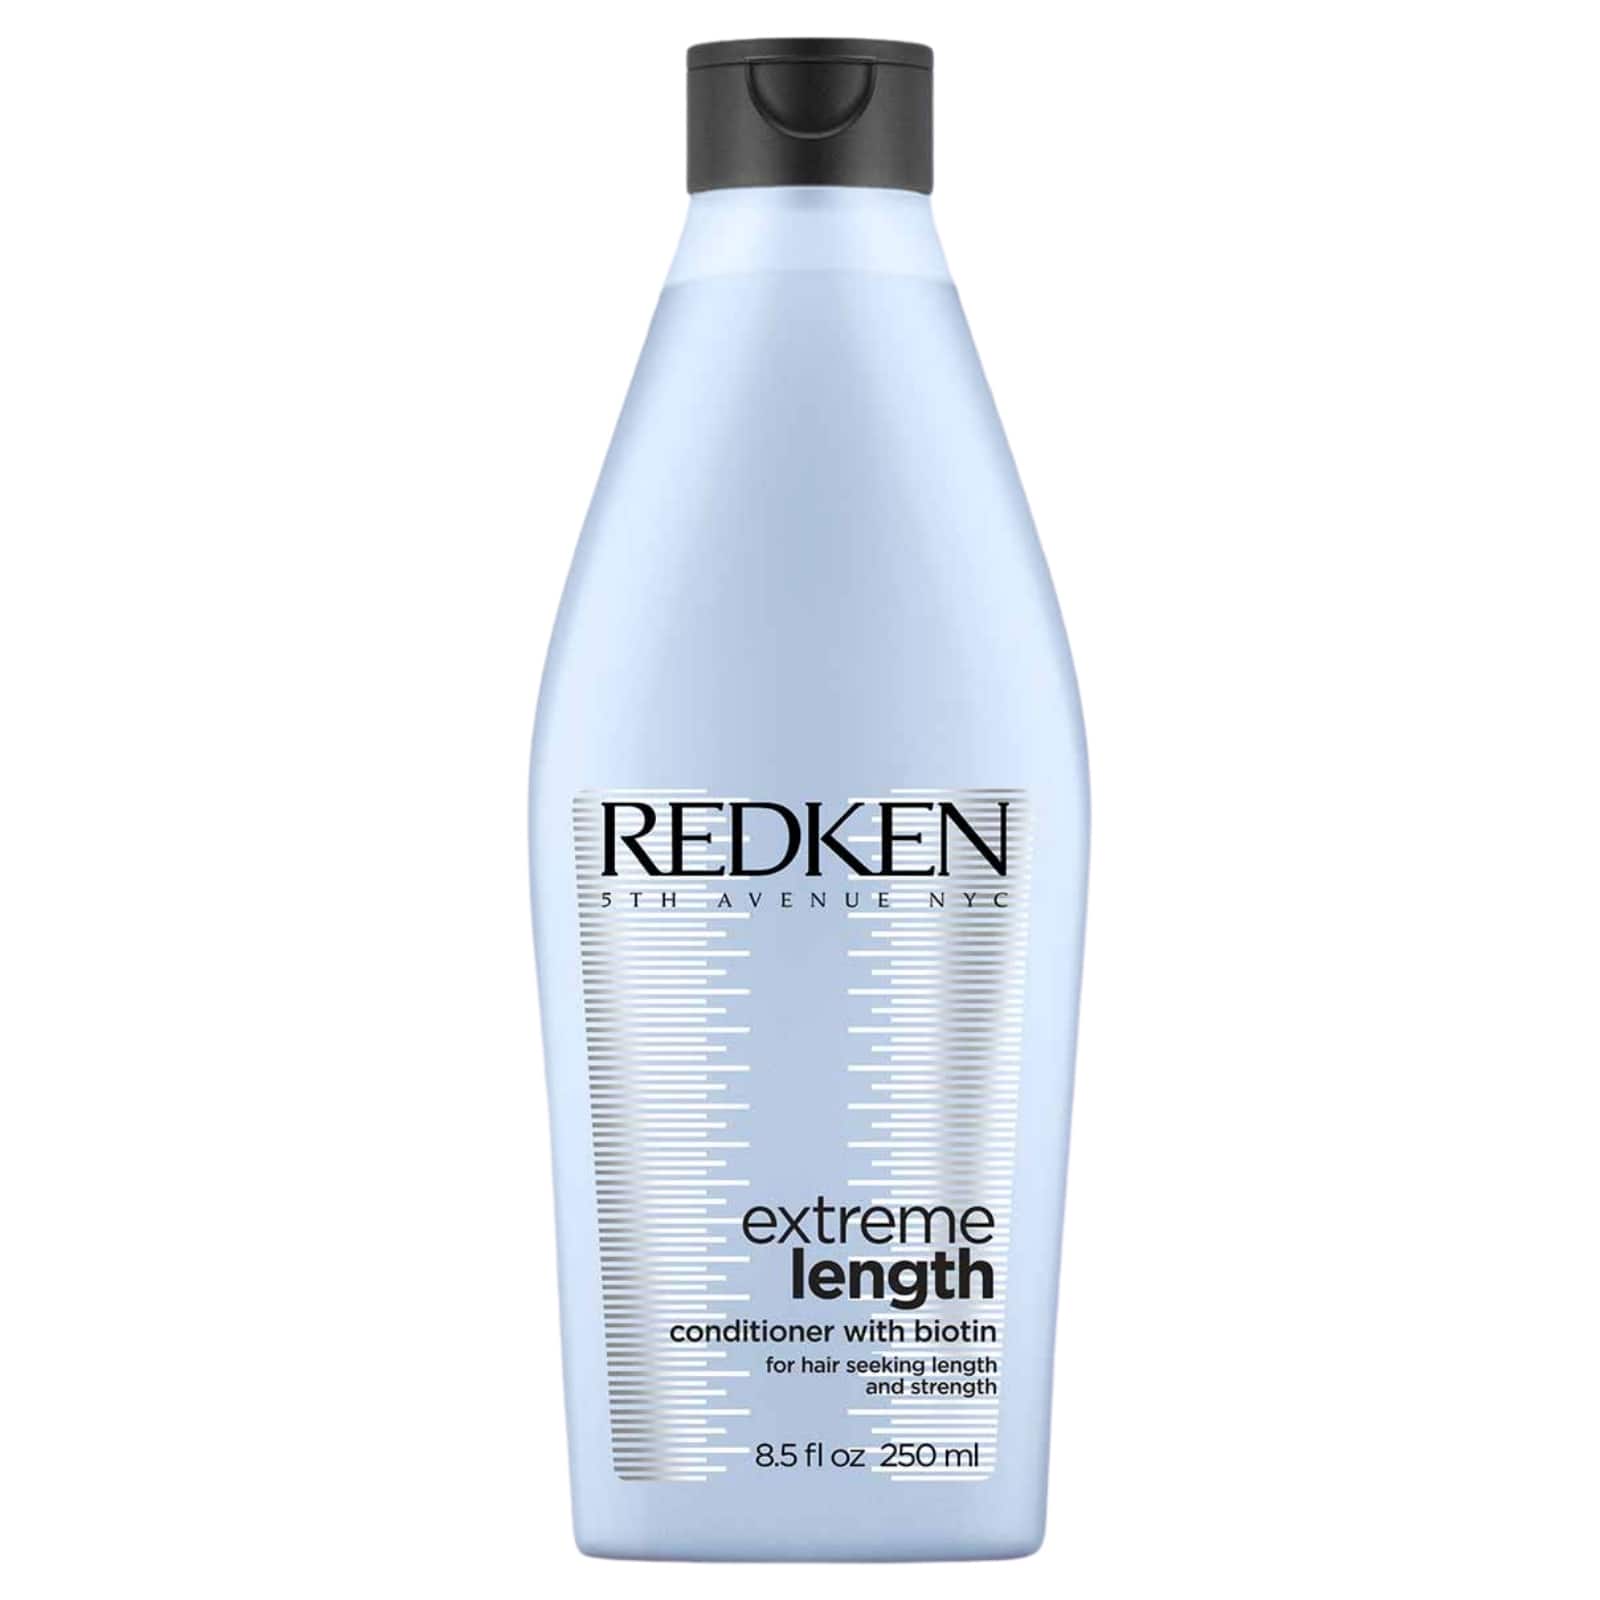 redken-extreme-length-conditioner-250ml